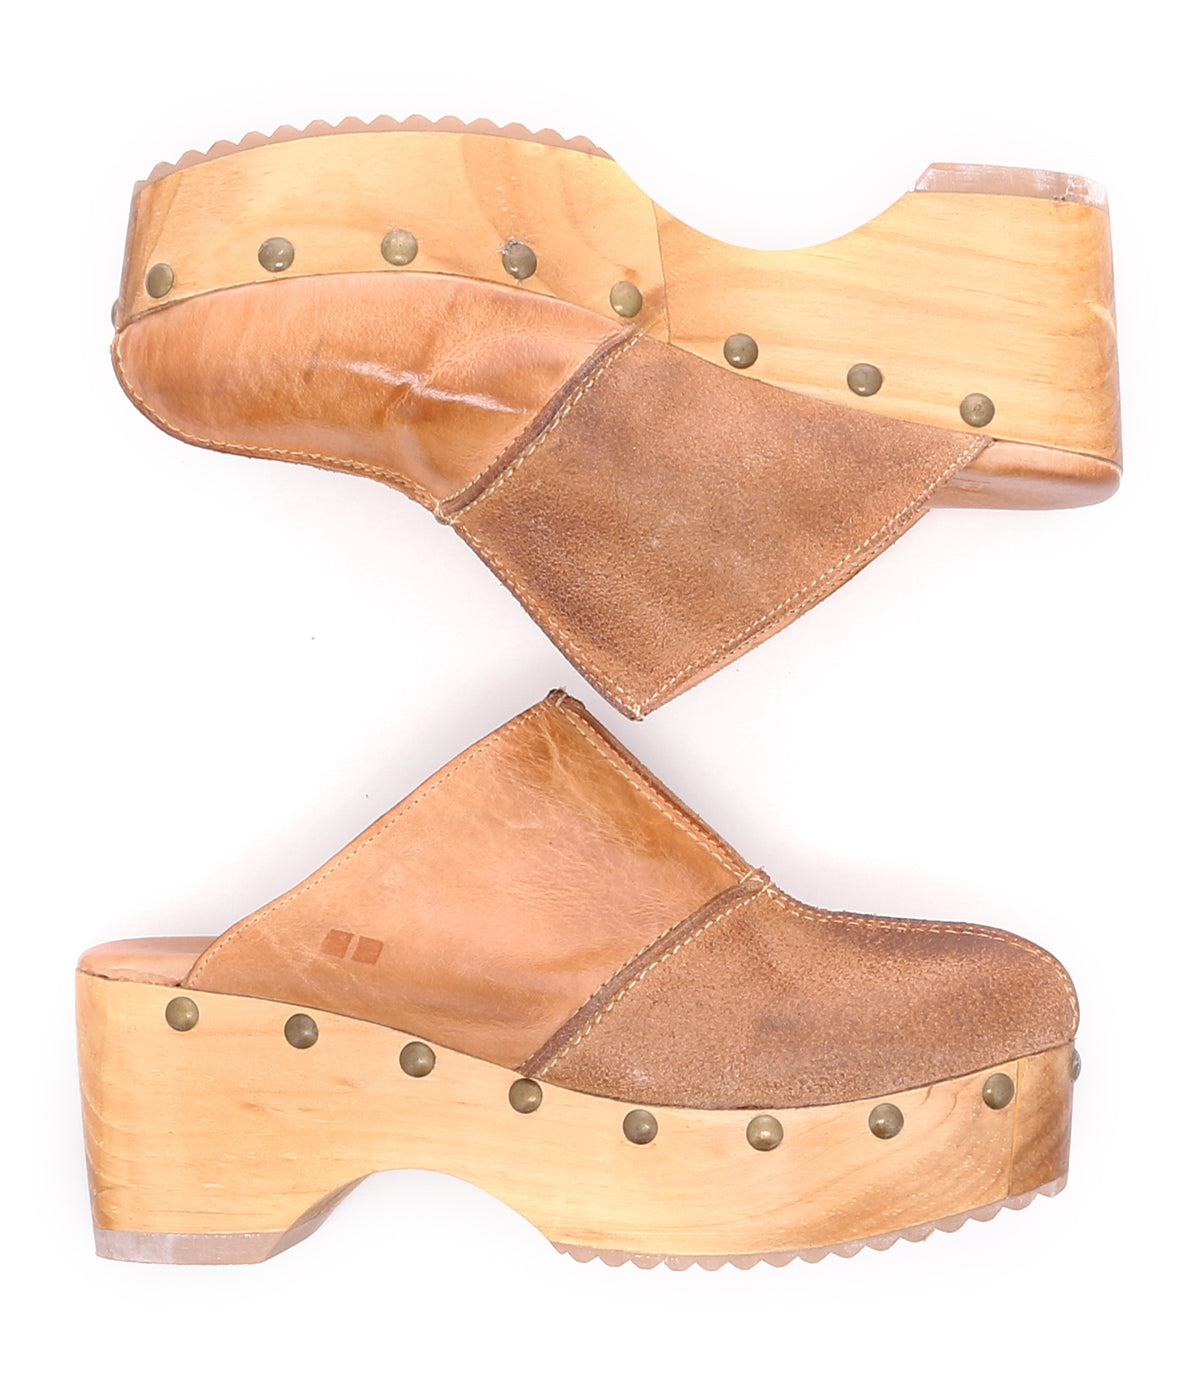 A pair of sustainable brown wood Mista clogs with rivets on the side, by Bed Stu.